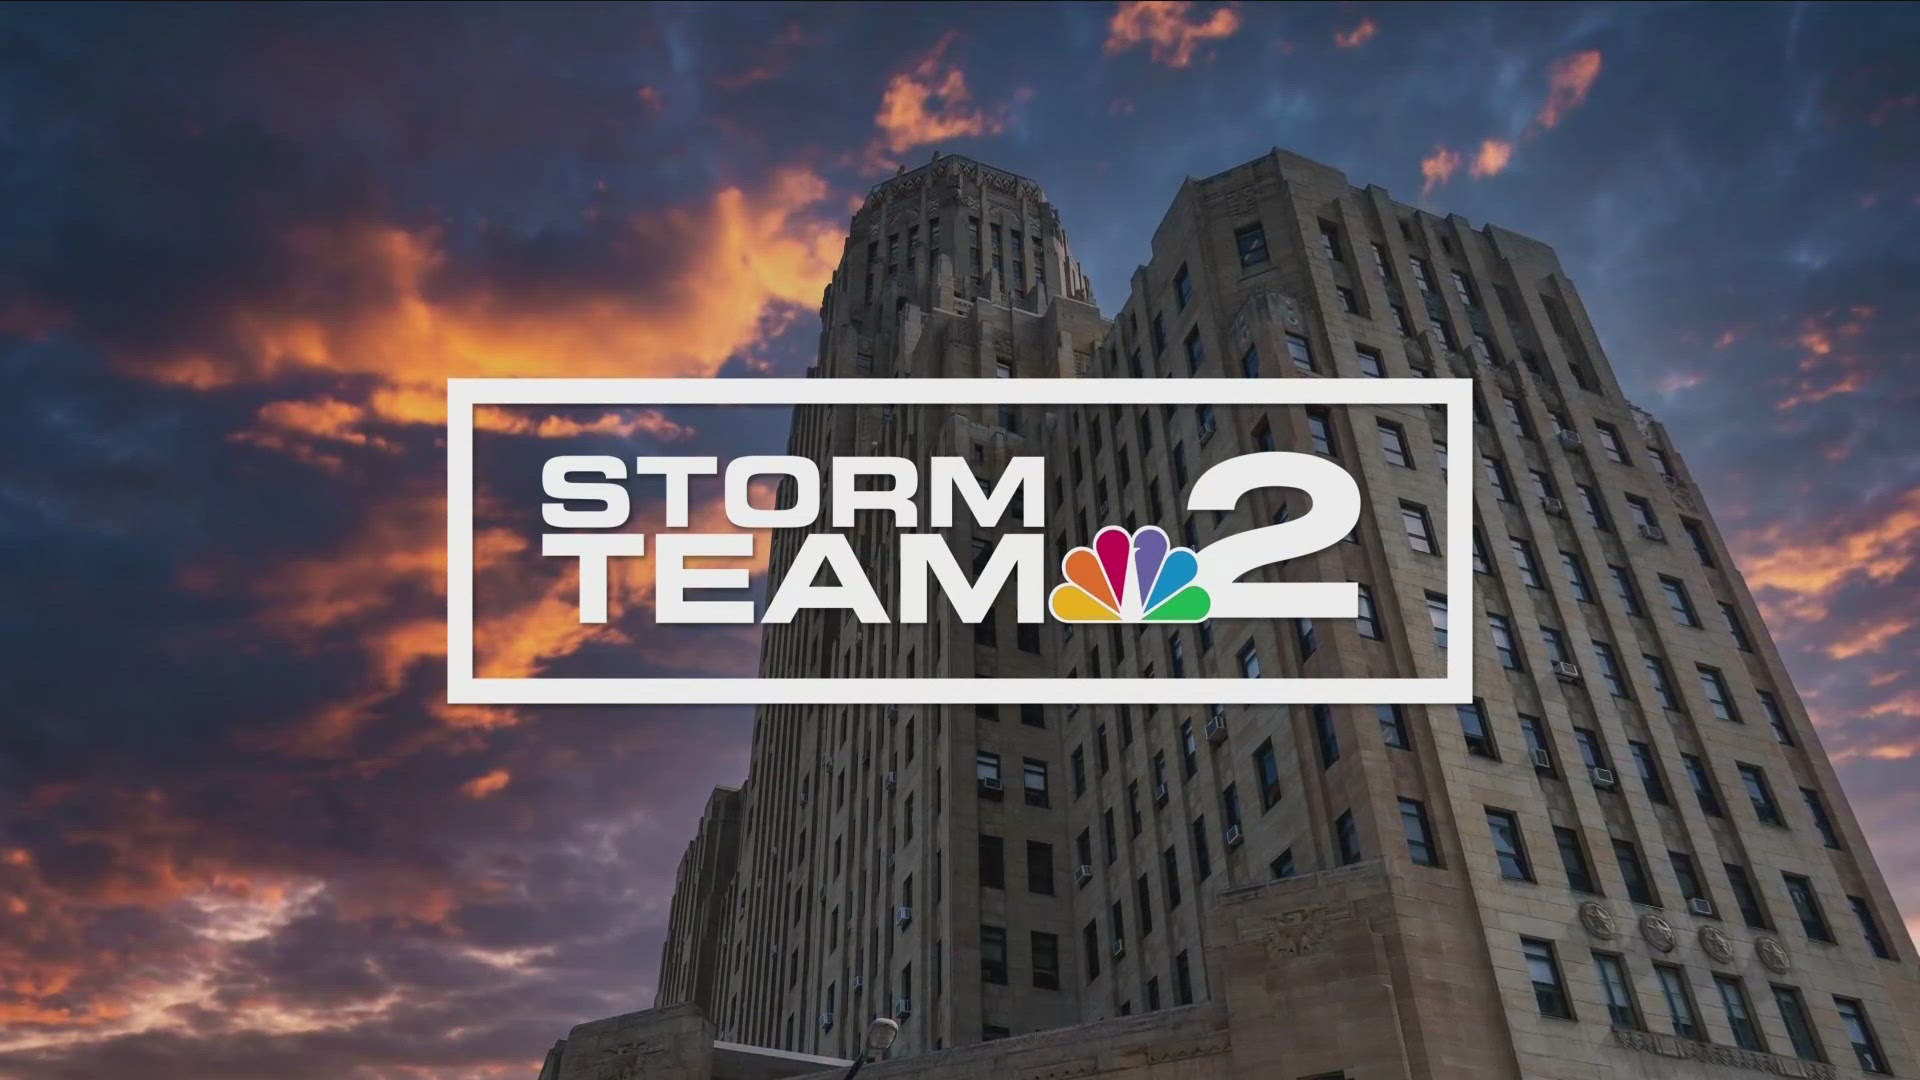 Storm Team 2 night forecast with Paul Hare for Saturday, May 11.